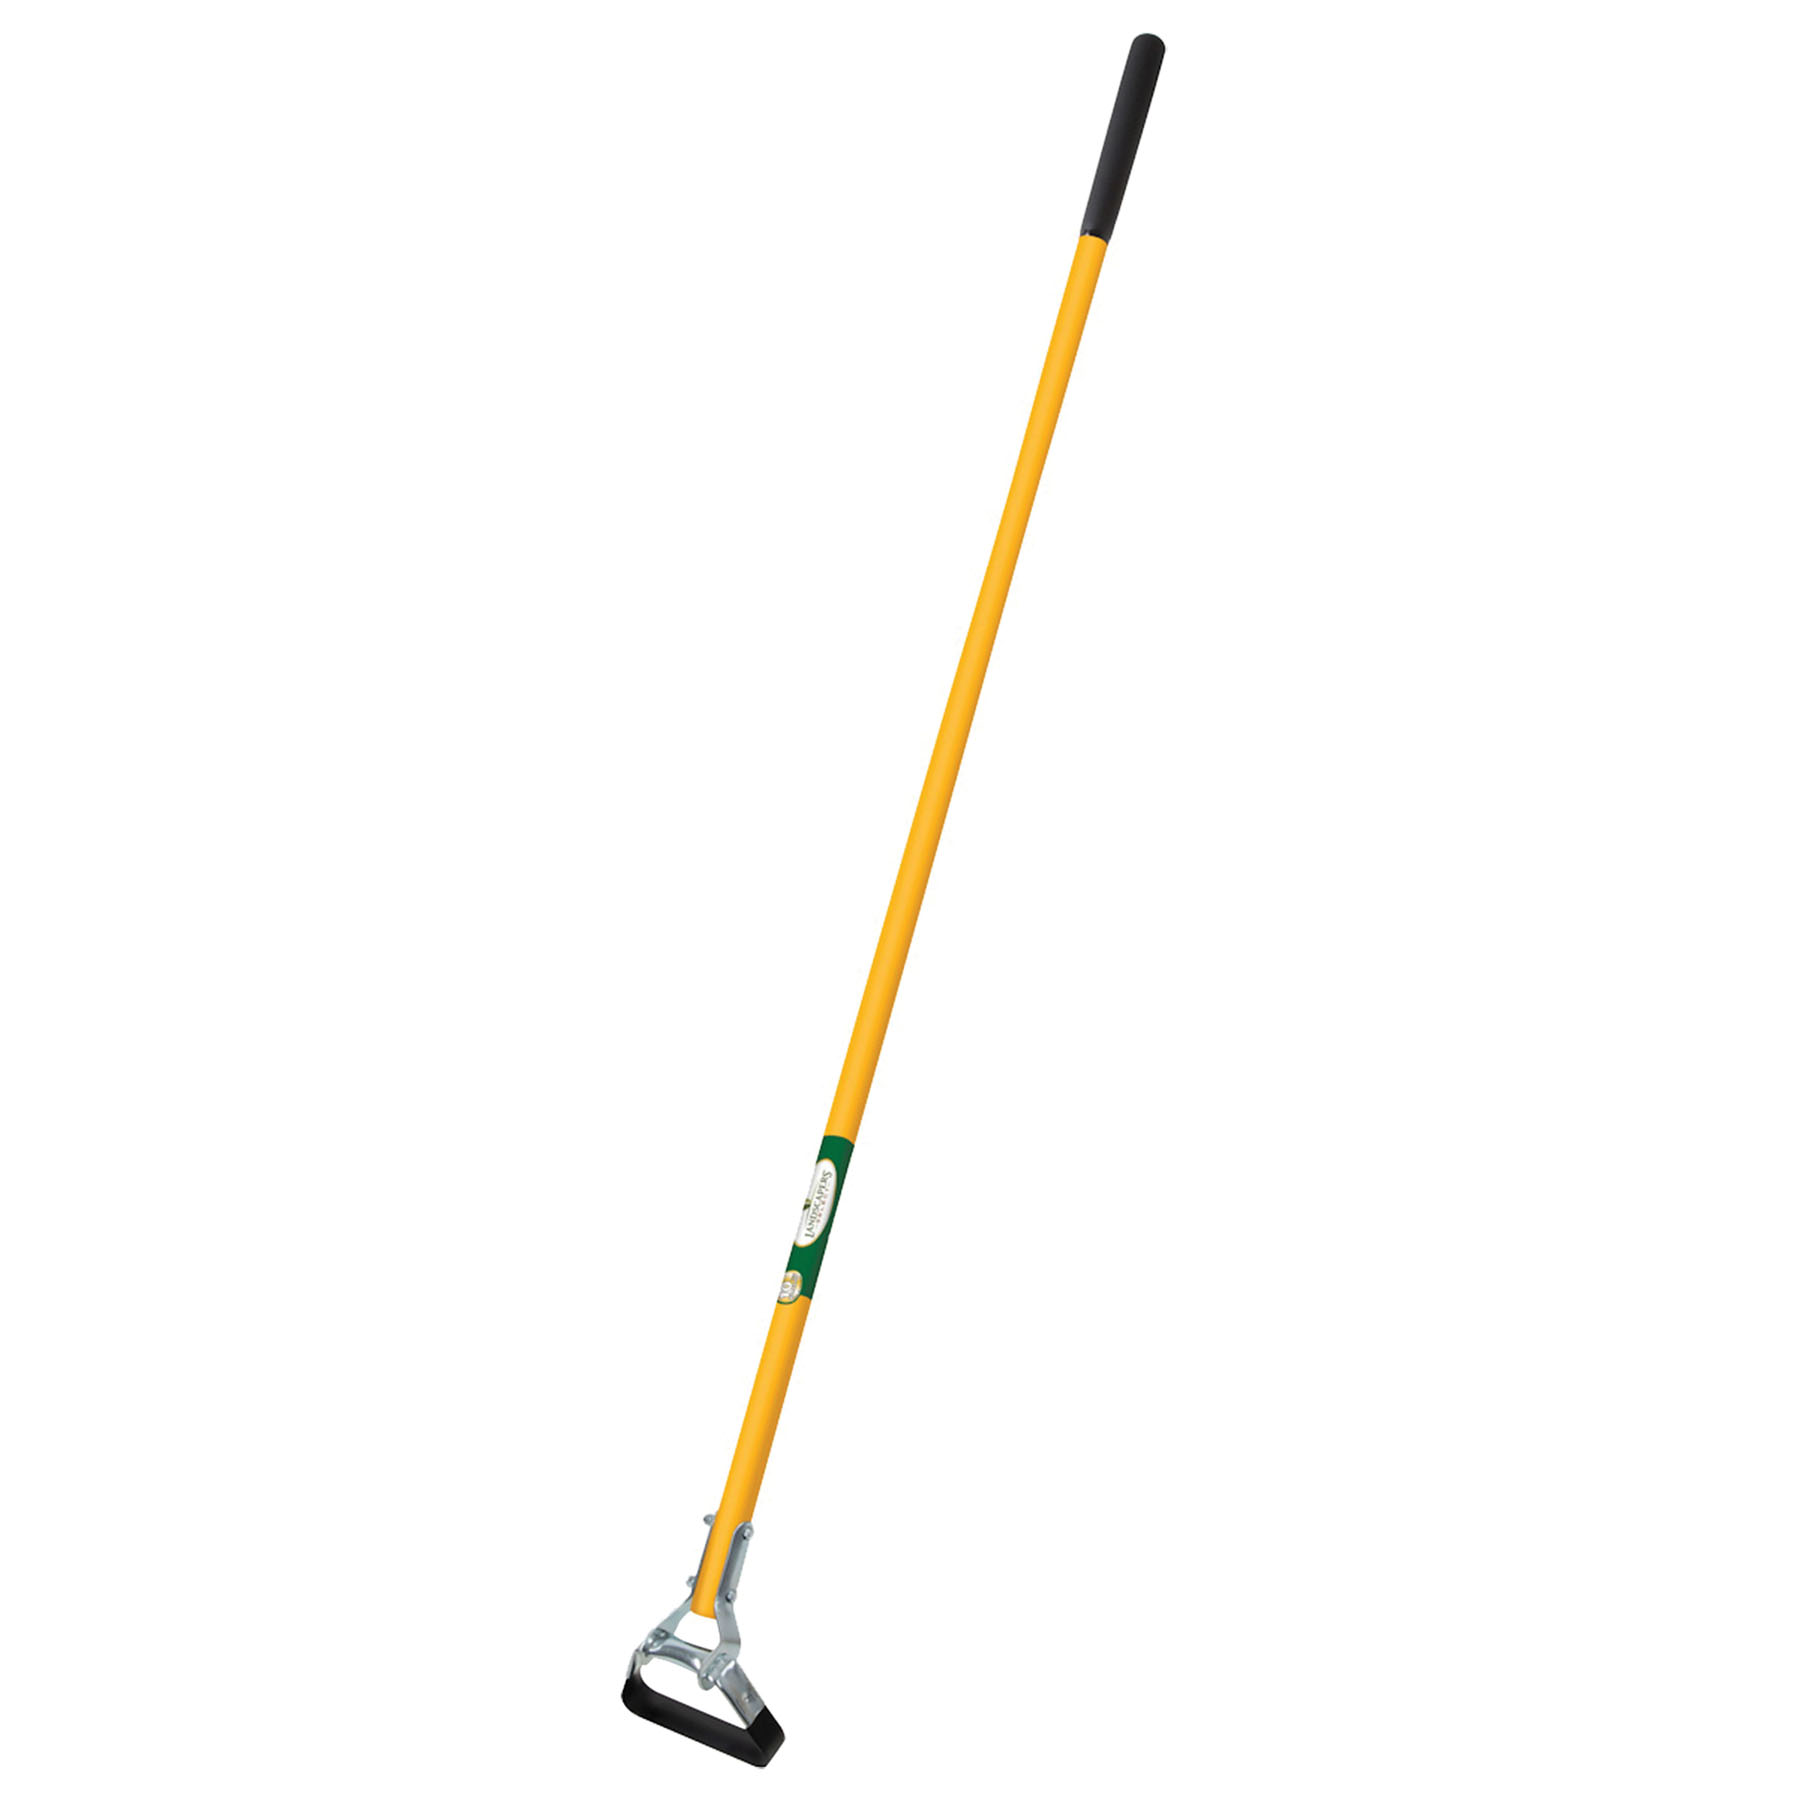 Landscapers Select ACT-HOE-F-OR Hoe Double Action Fiberglass Handle, 54 in